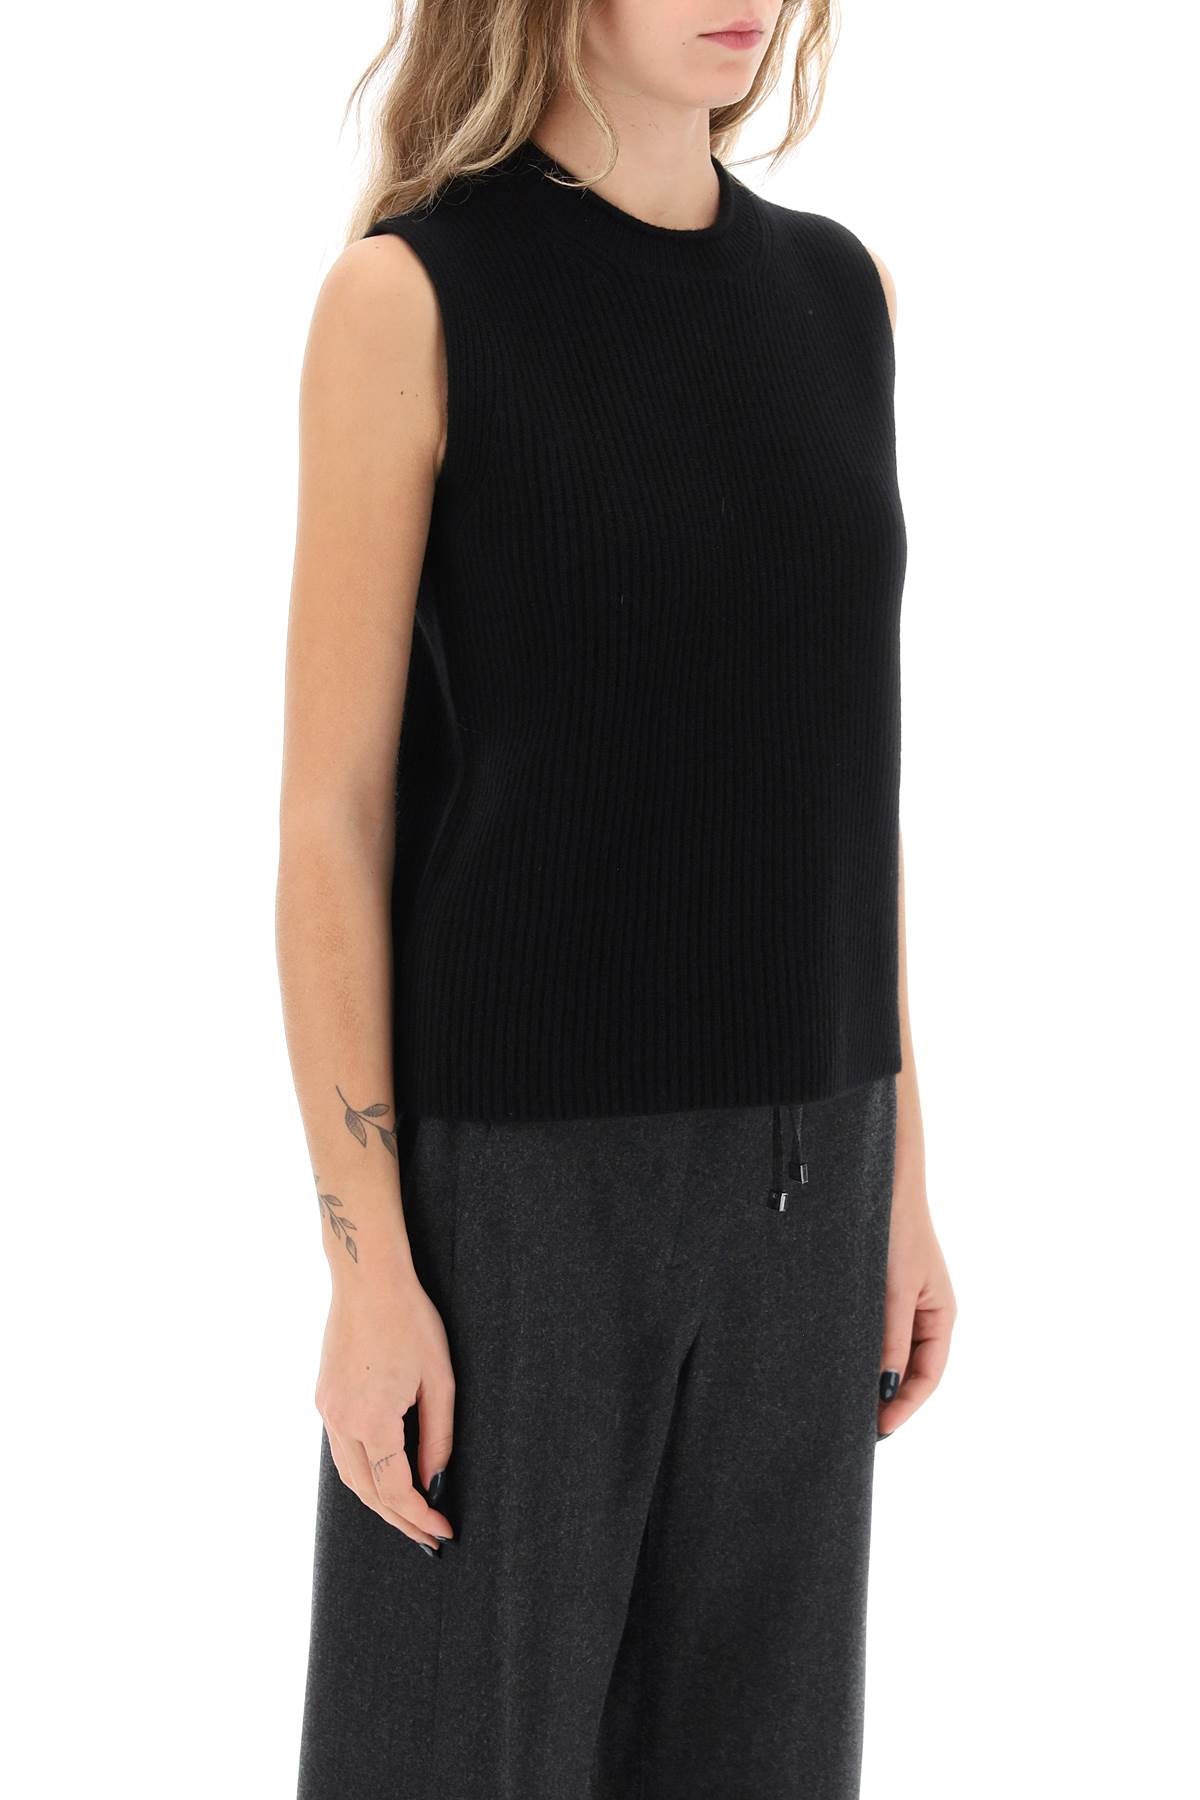 Guest in residence layer up cashmere vest-1